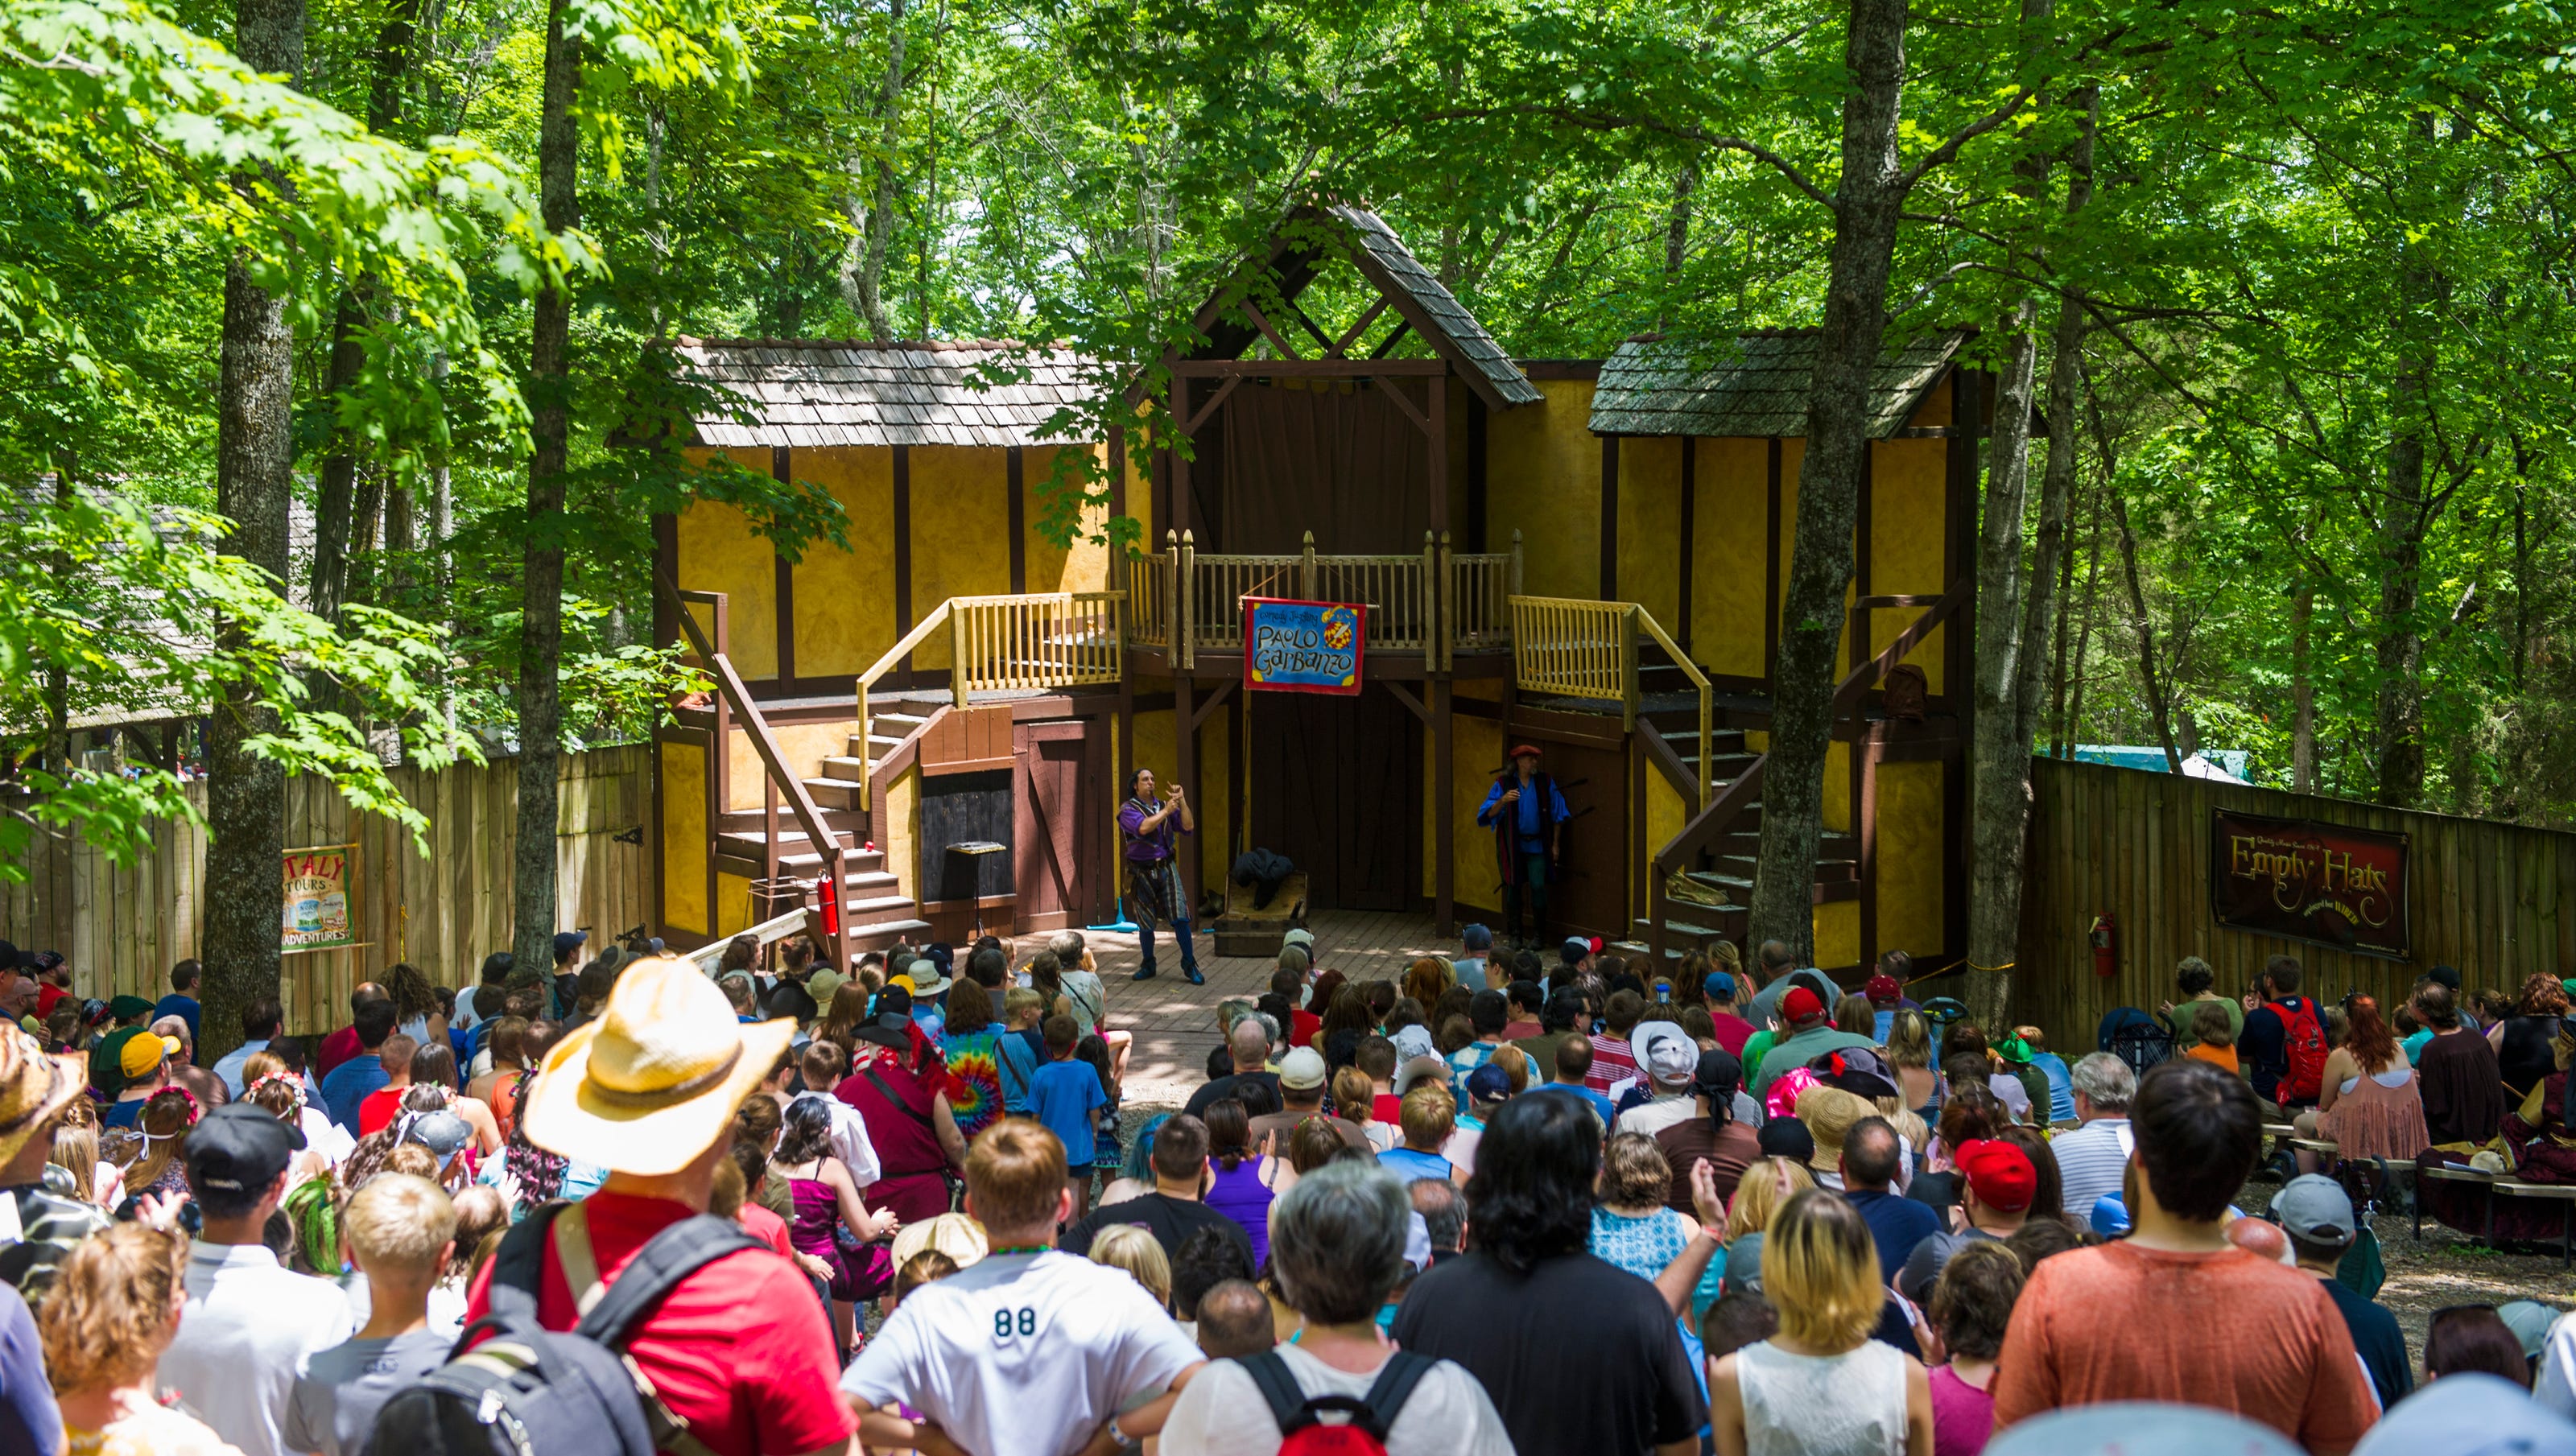 Tennessee Renaissance Festival may soon be owned by Williamson County